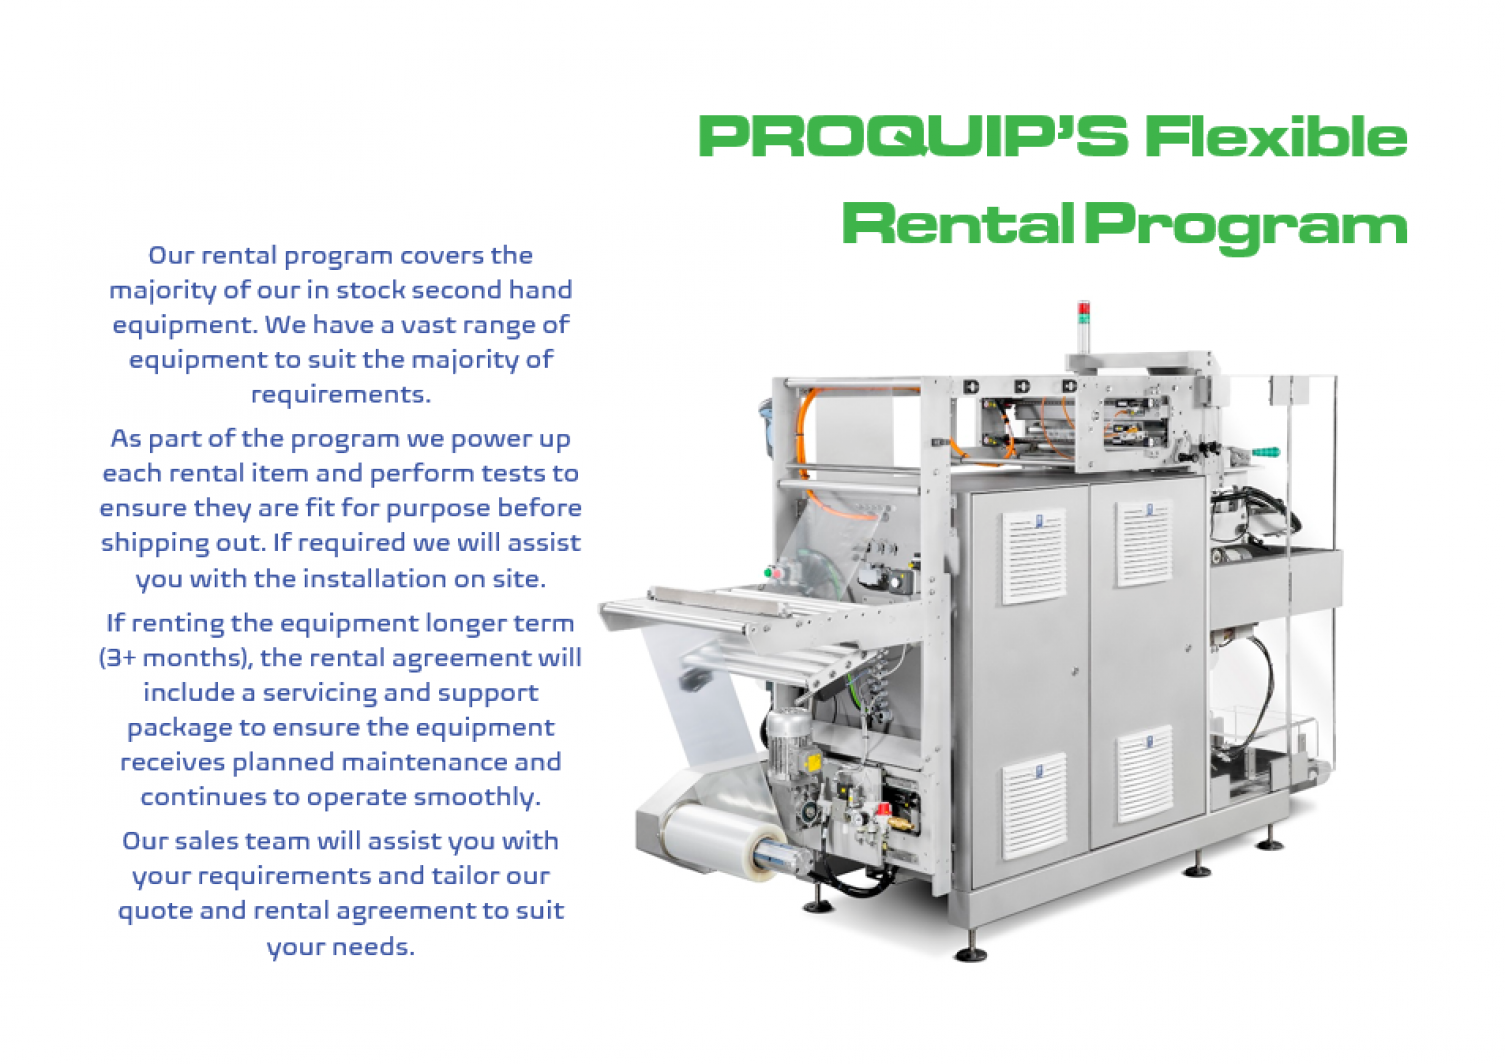 An overview of what the rental program entails